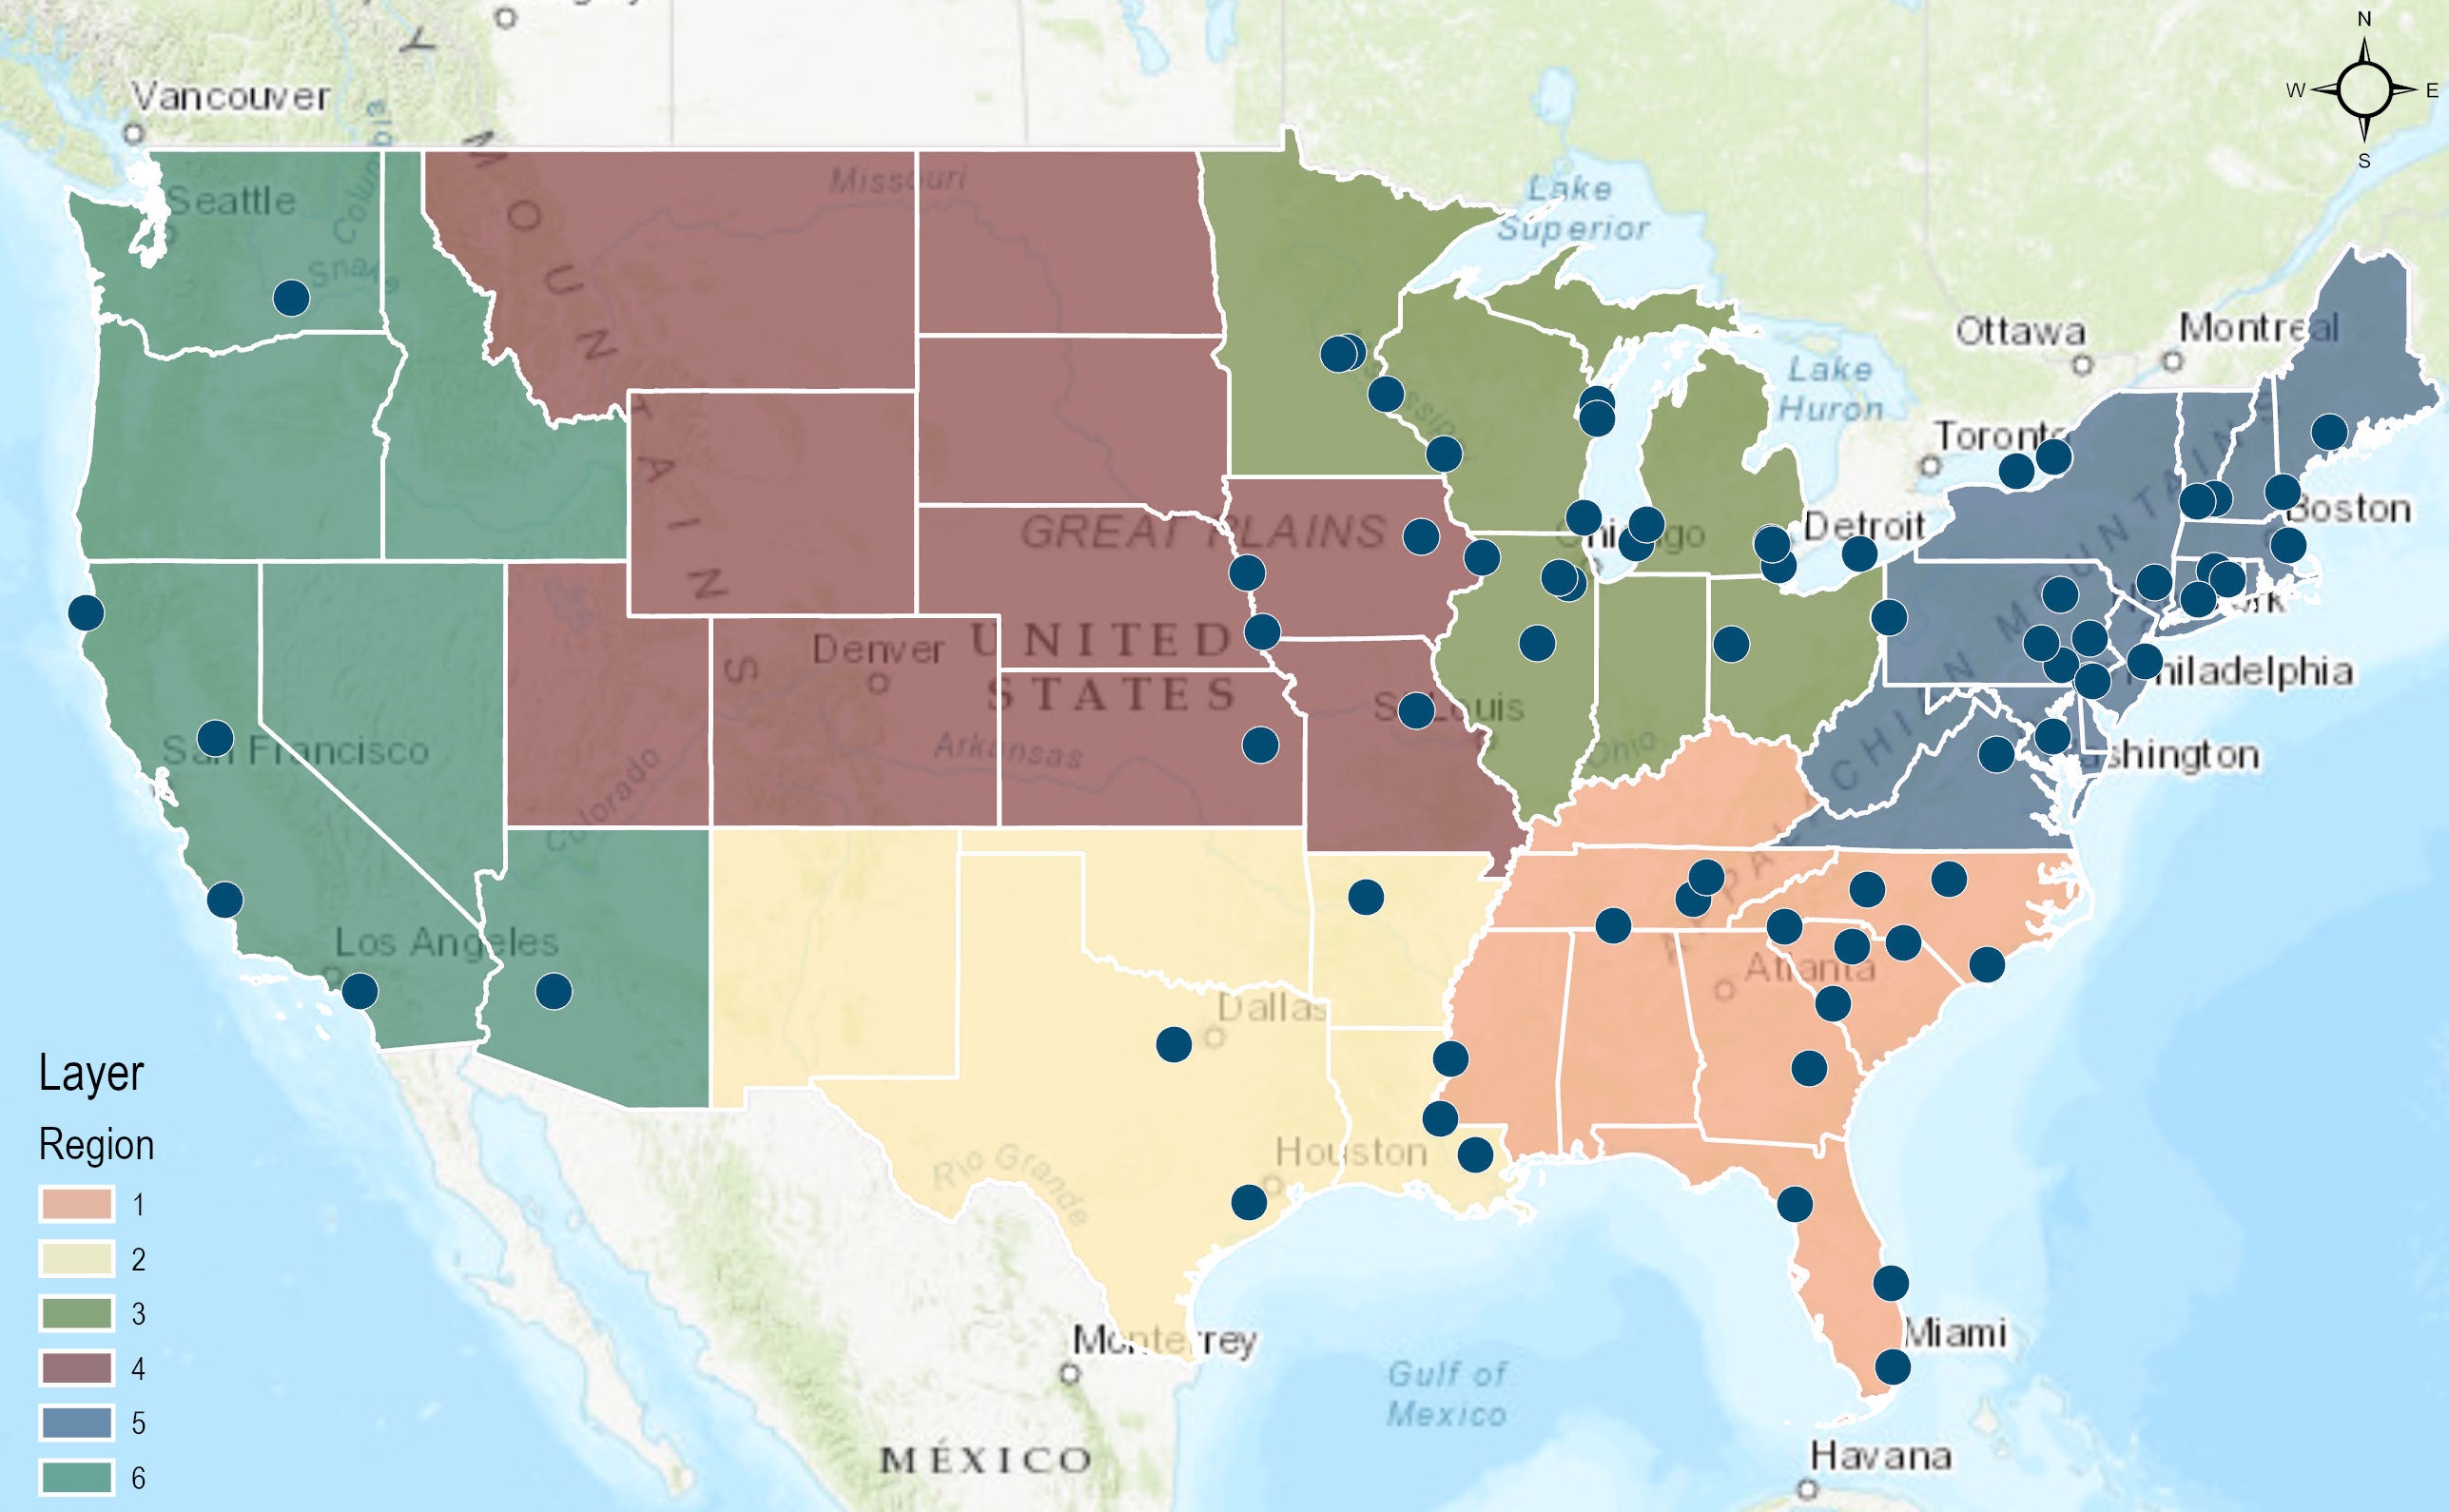 graphic map of the US with the nuclear power plants located with dots